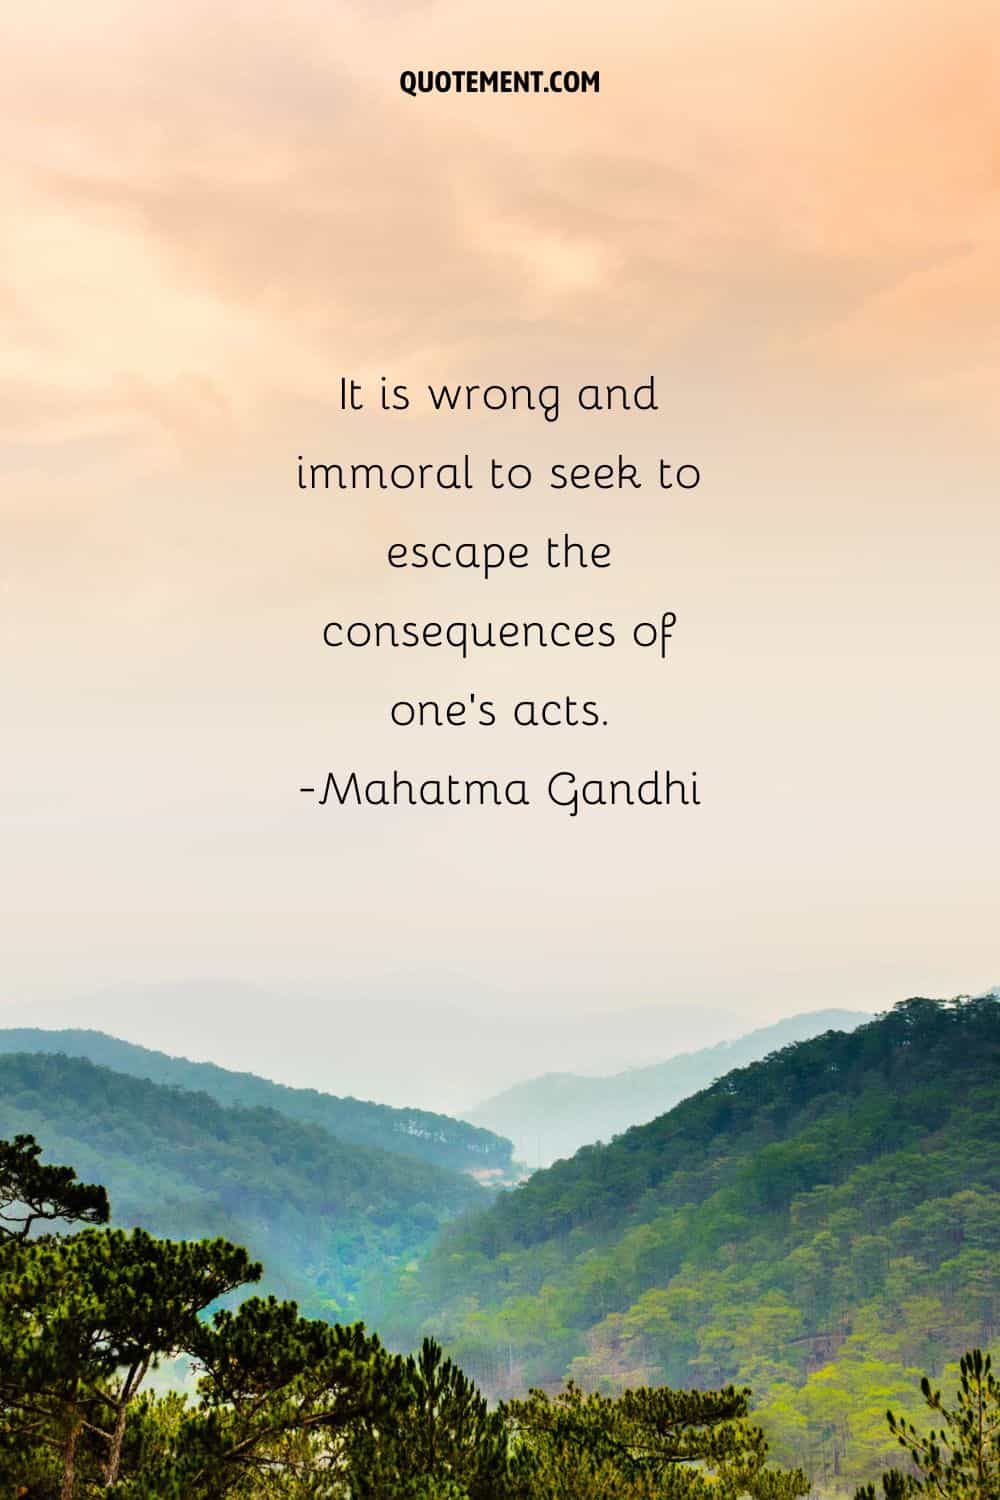 It is wrong and immoral to seek to escape the consequences of one's acts.